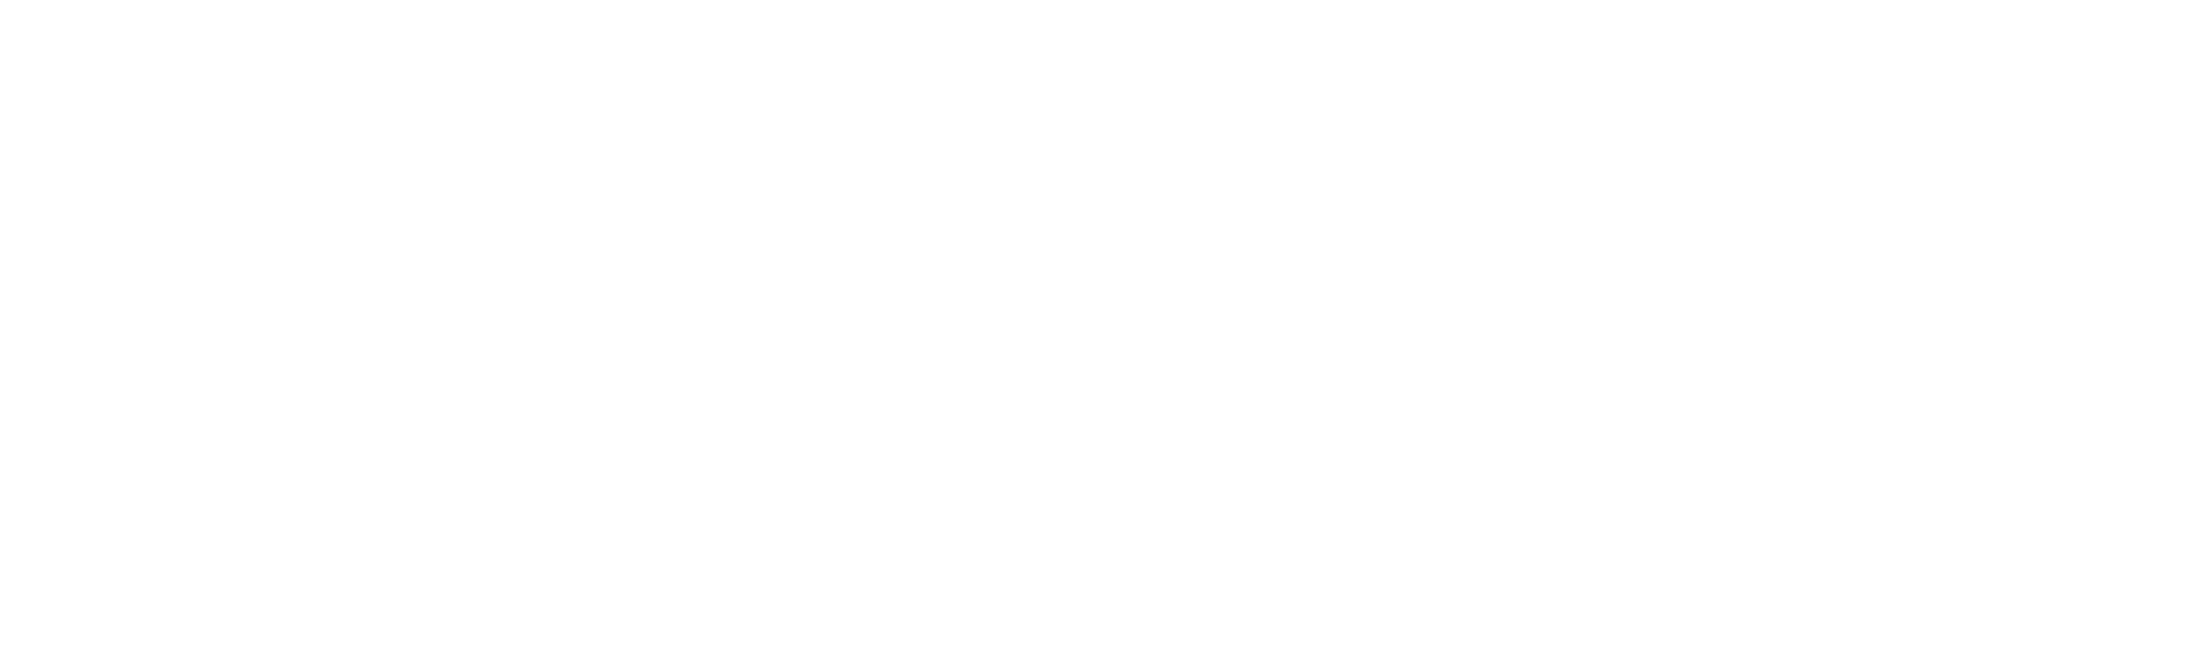 Wisconsin Golf Industry BMP Guide